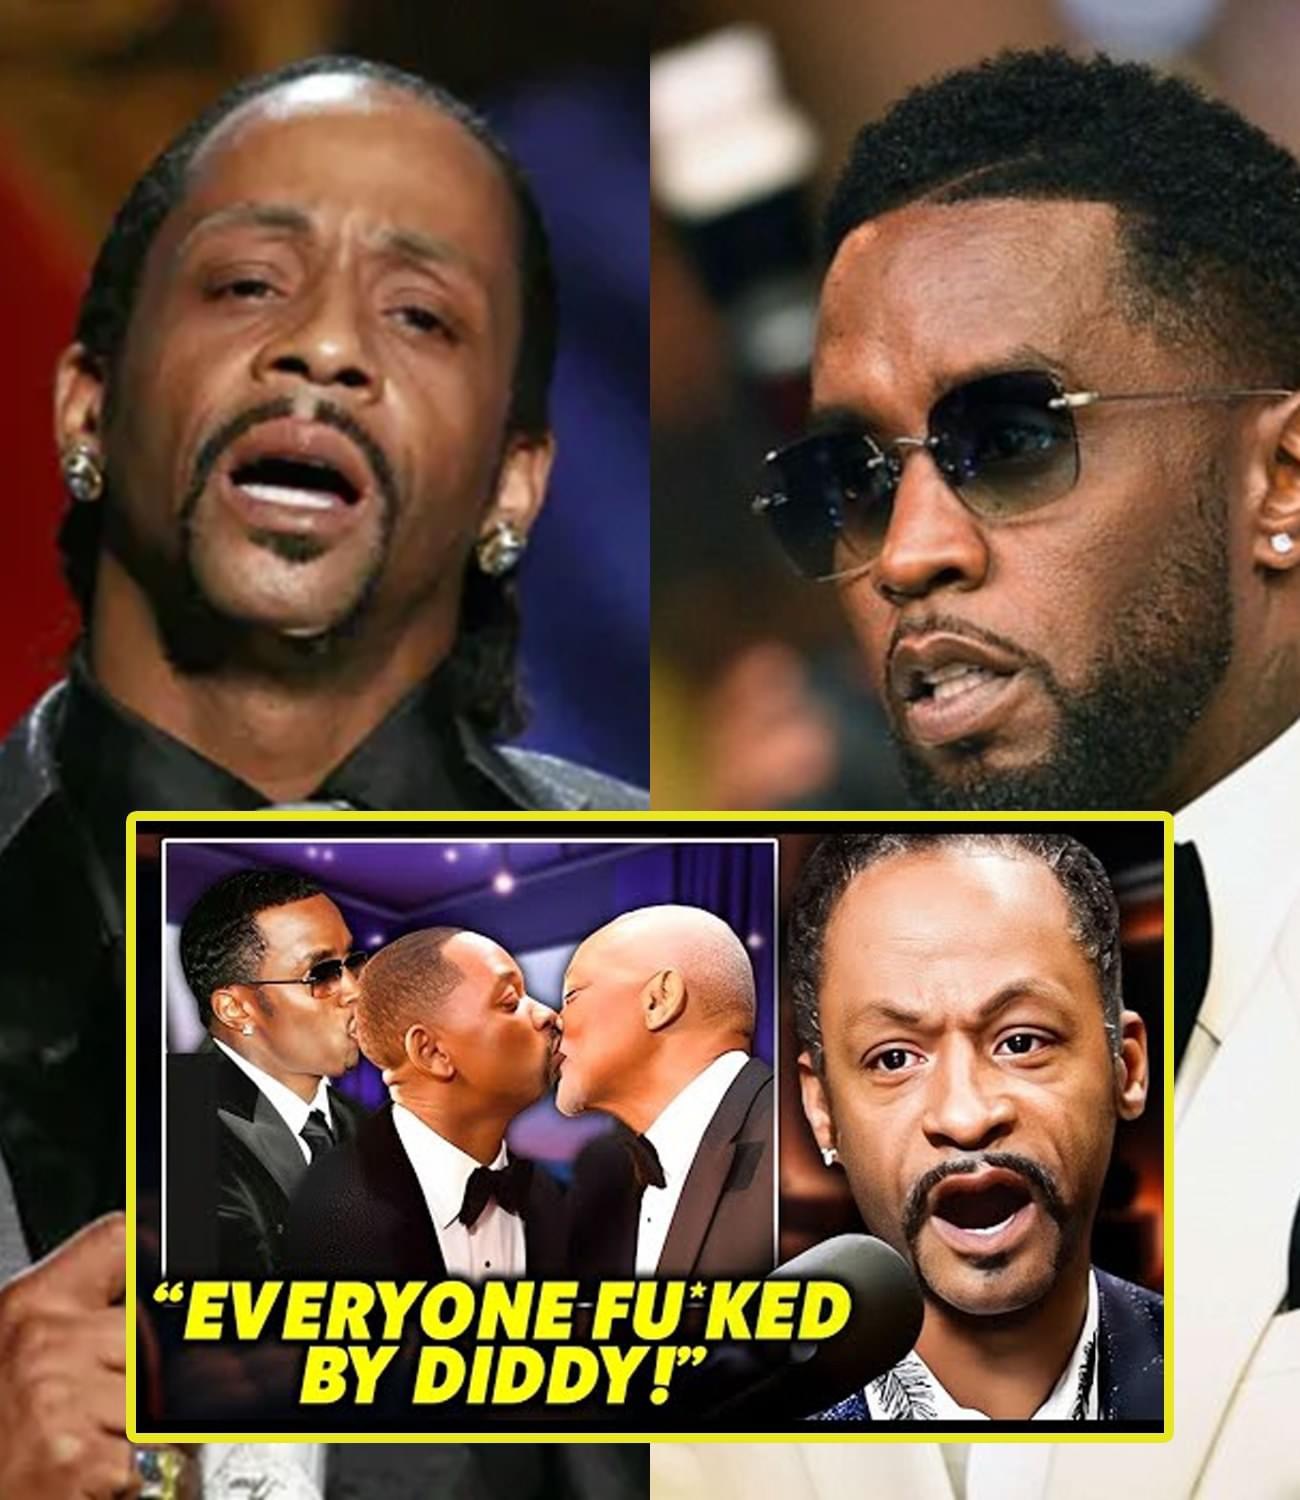 7 MINUTES AGO: Katt Williams Brings More Evidence of Diddy Trying To S.A Him!